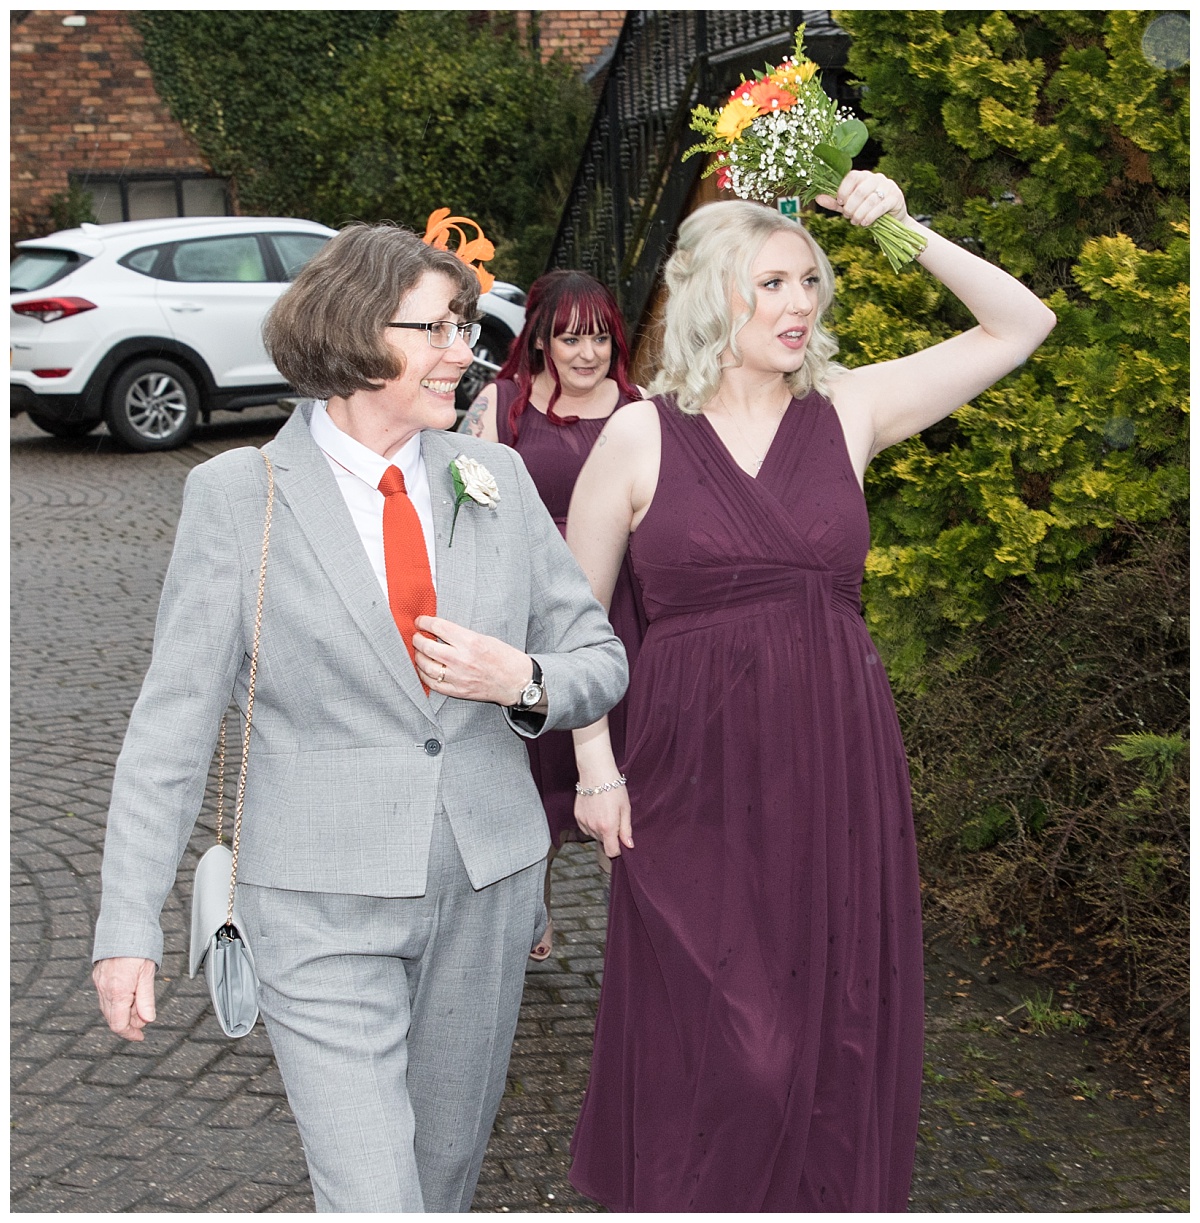 Wedding Photography Manchester - Lois and Louise's Moddershall Oaks Country Spa Retreat wedding day 42